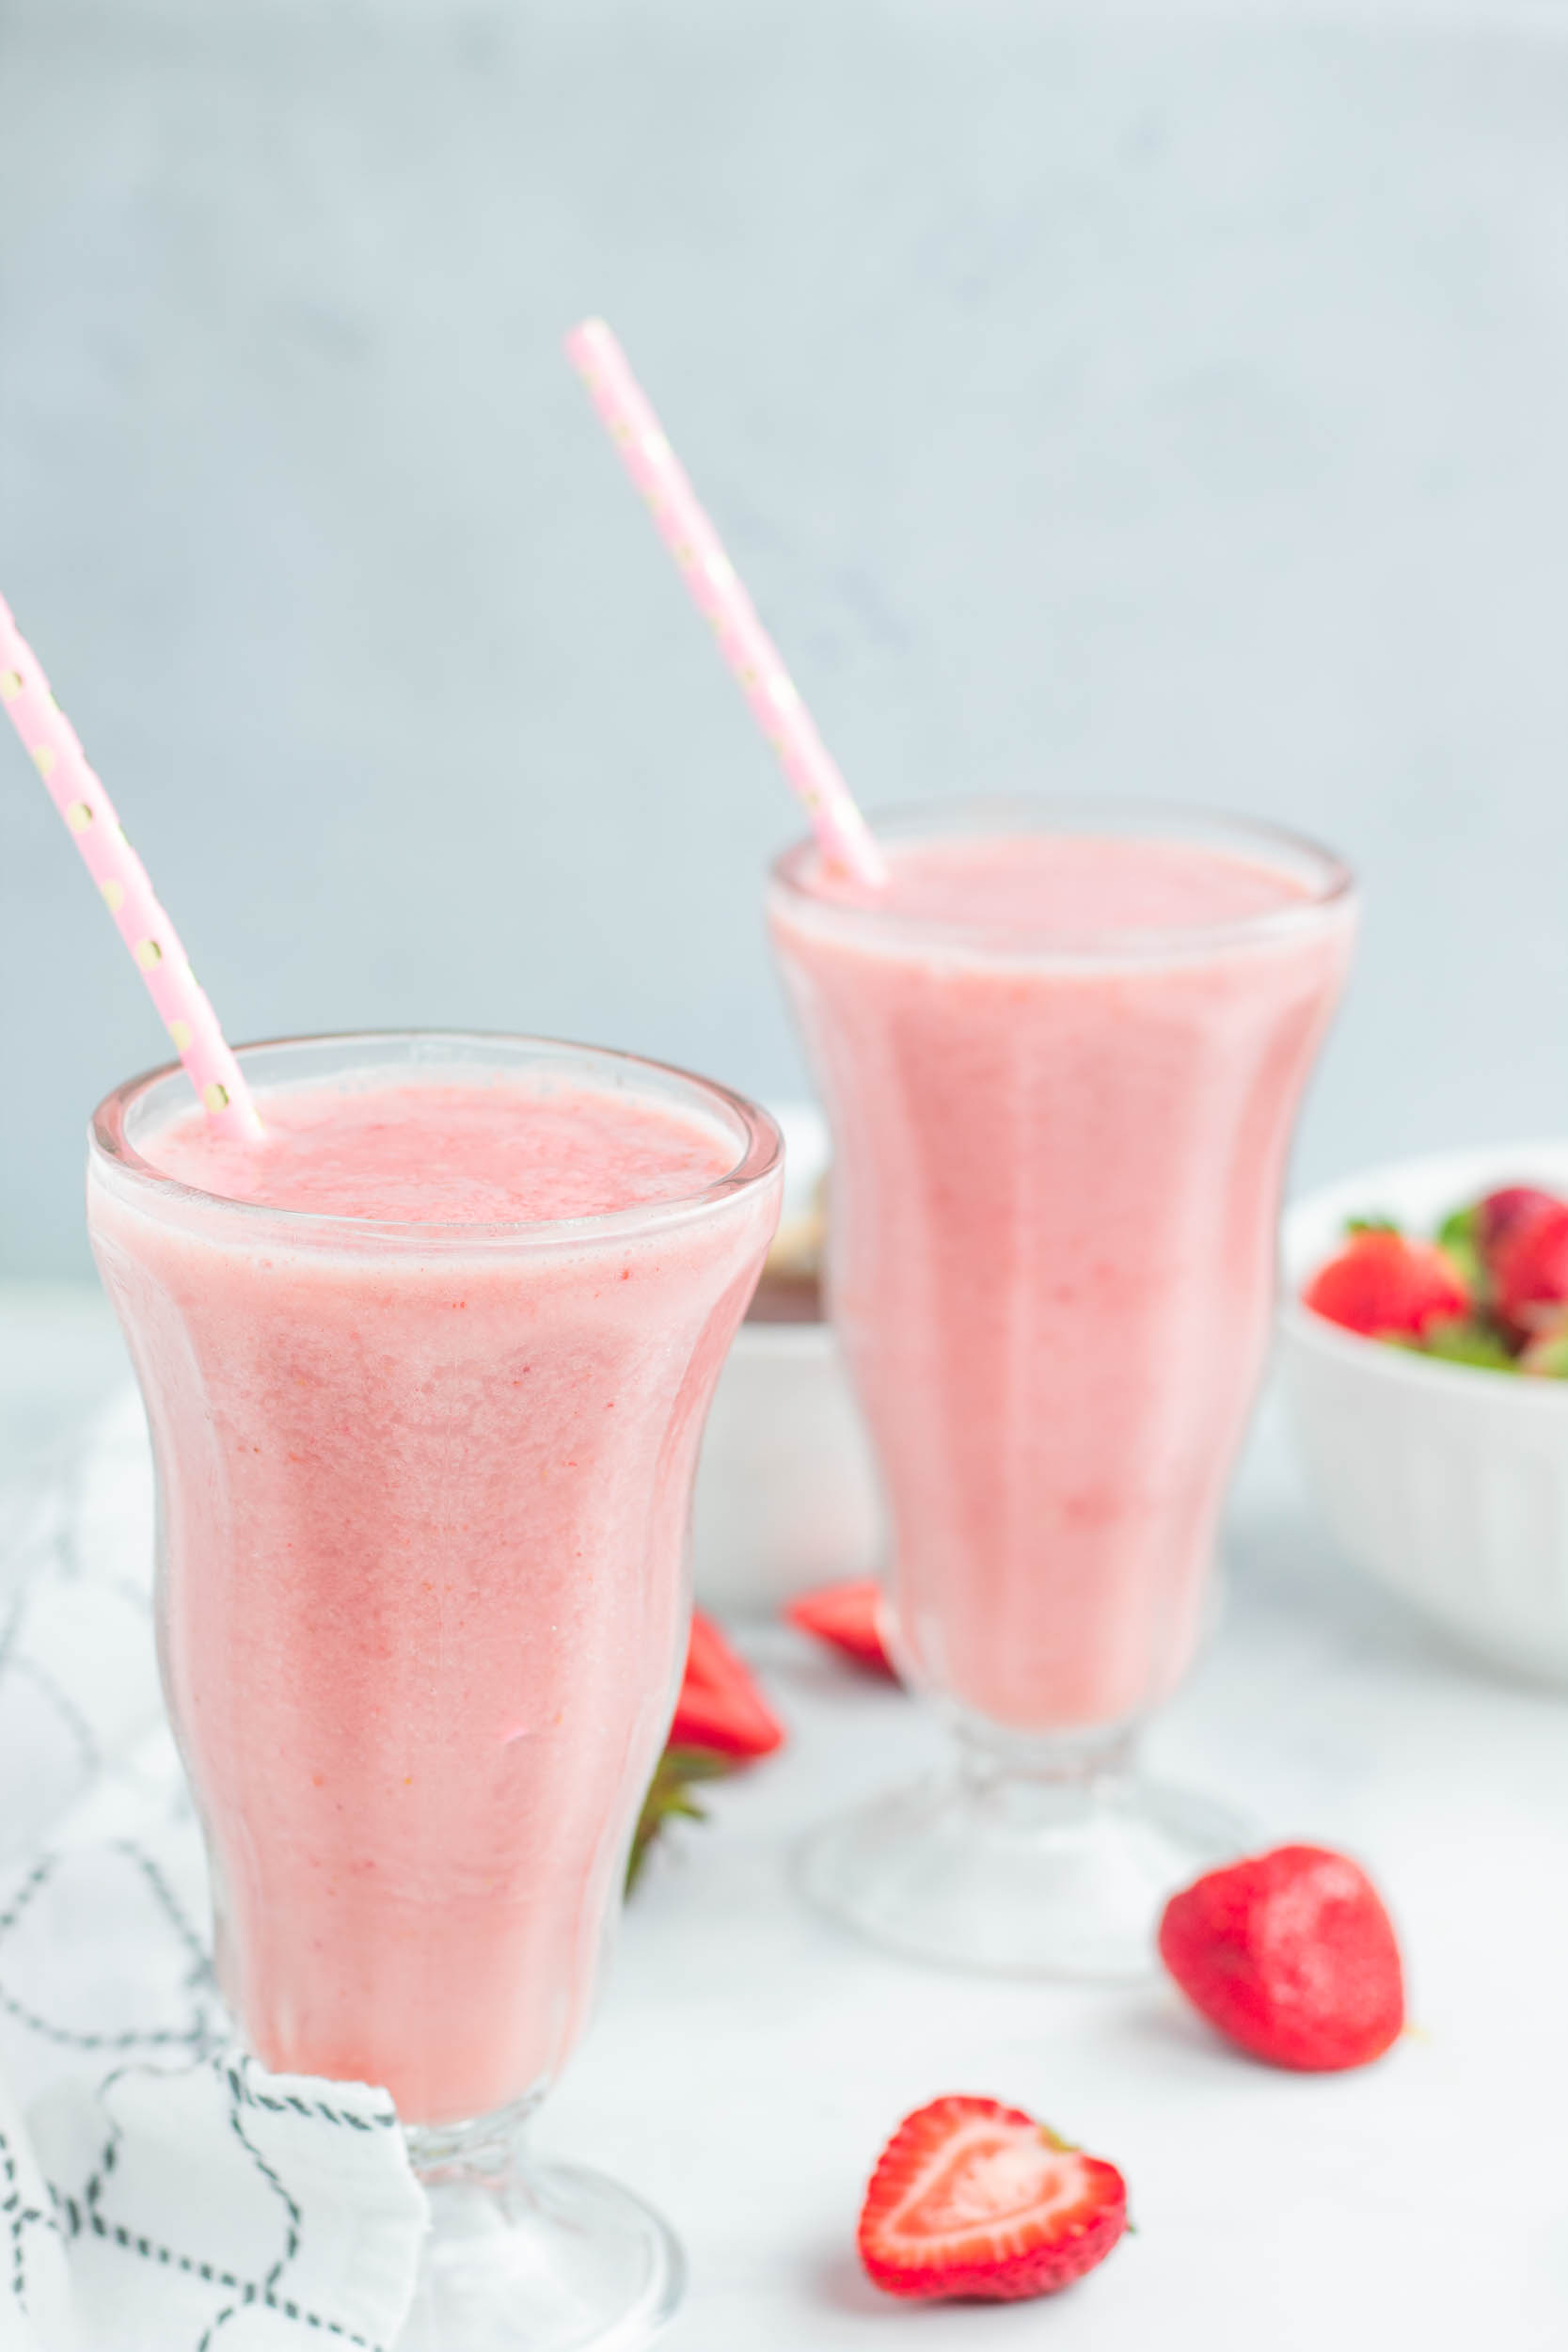 Dairy-free Strawberry Smoothie (3 Ingredients, Plant-based)